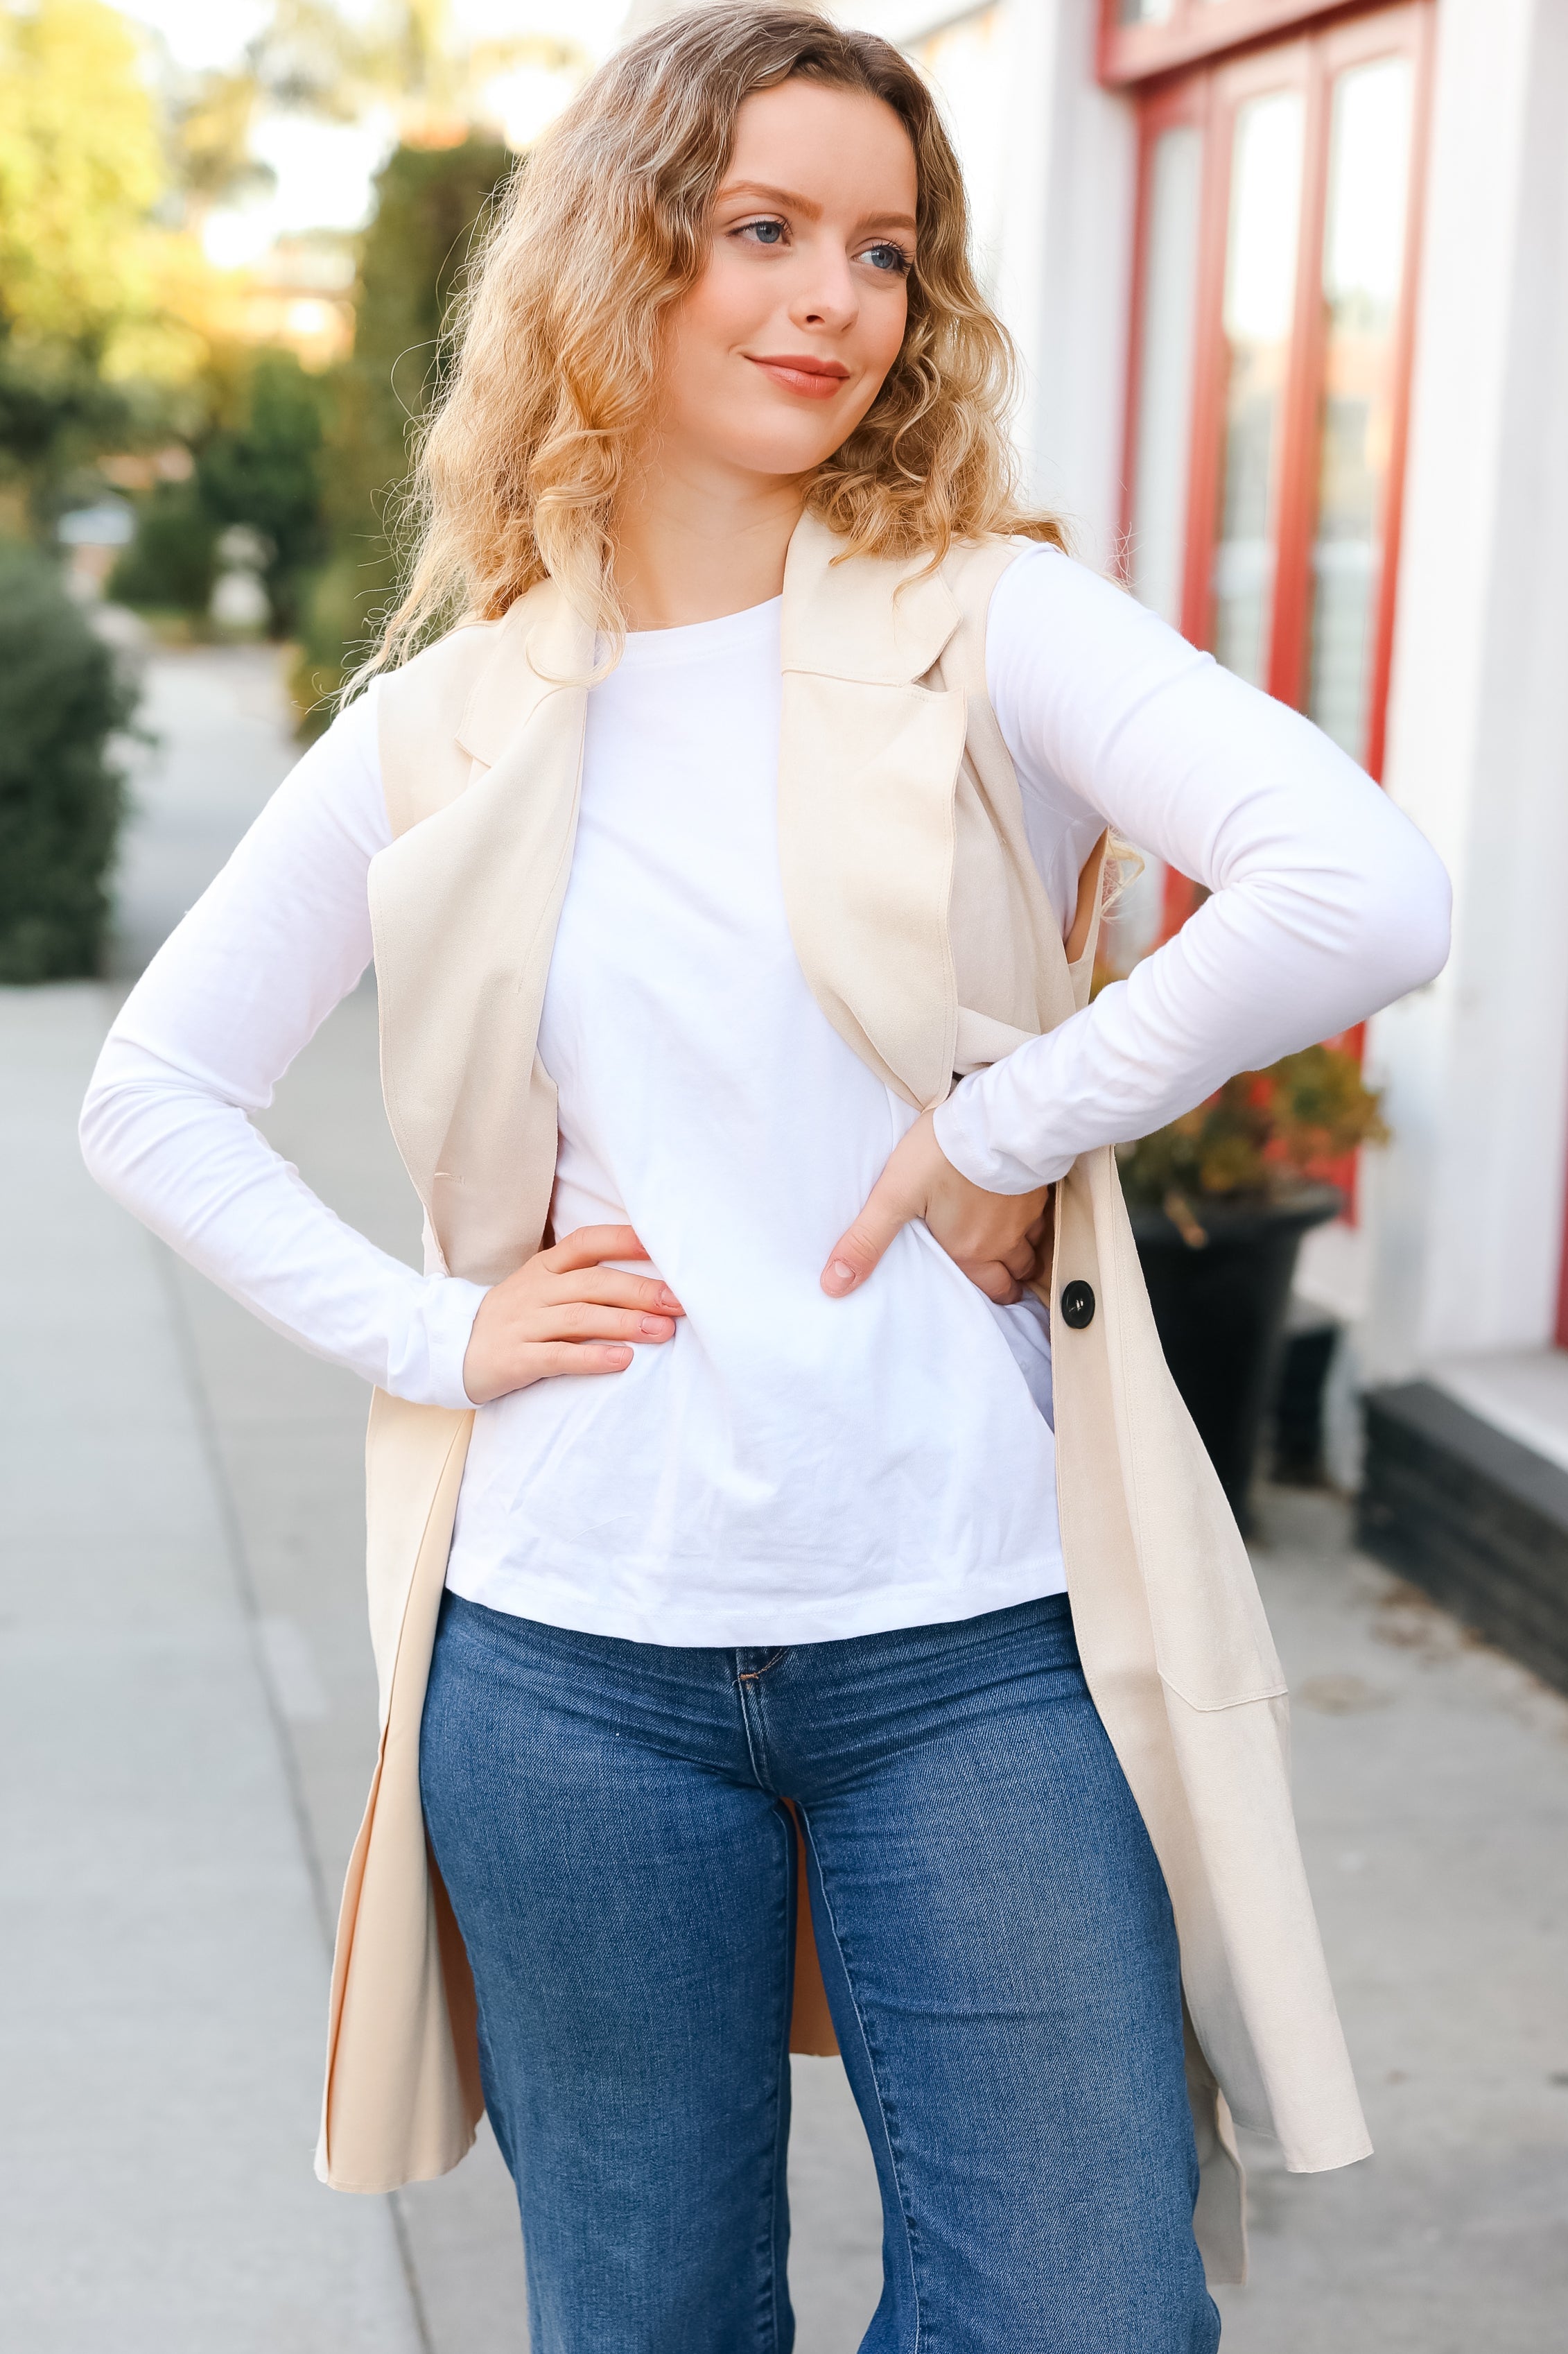 Back In Town Cream Faux Suede Trench Coat Vest Sugarfox